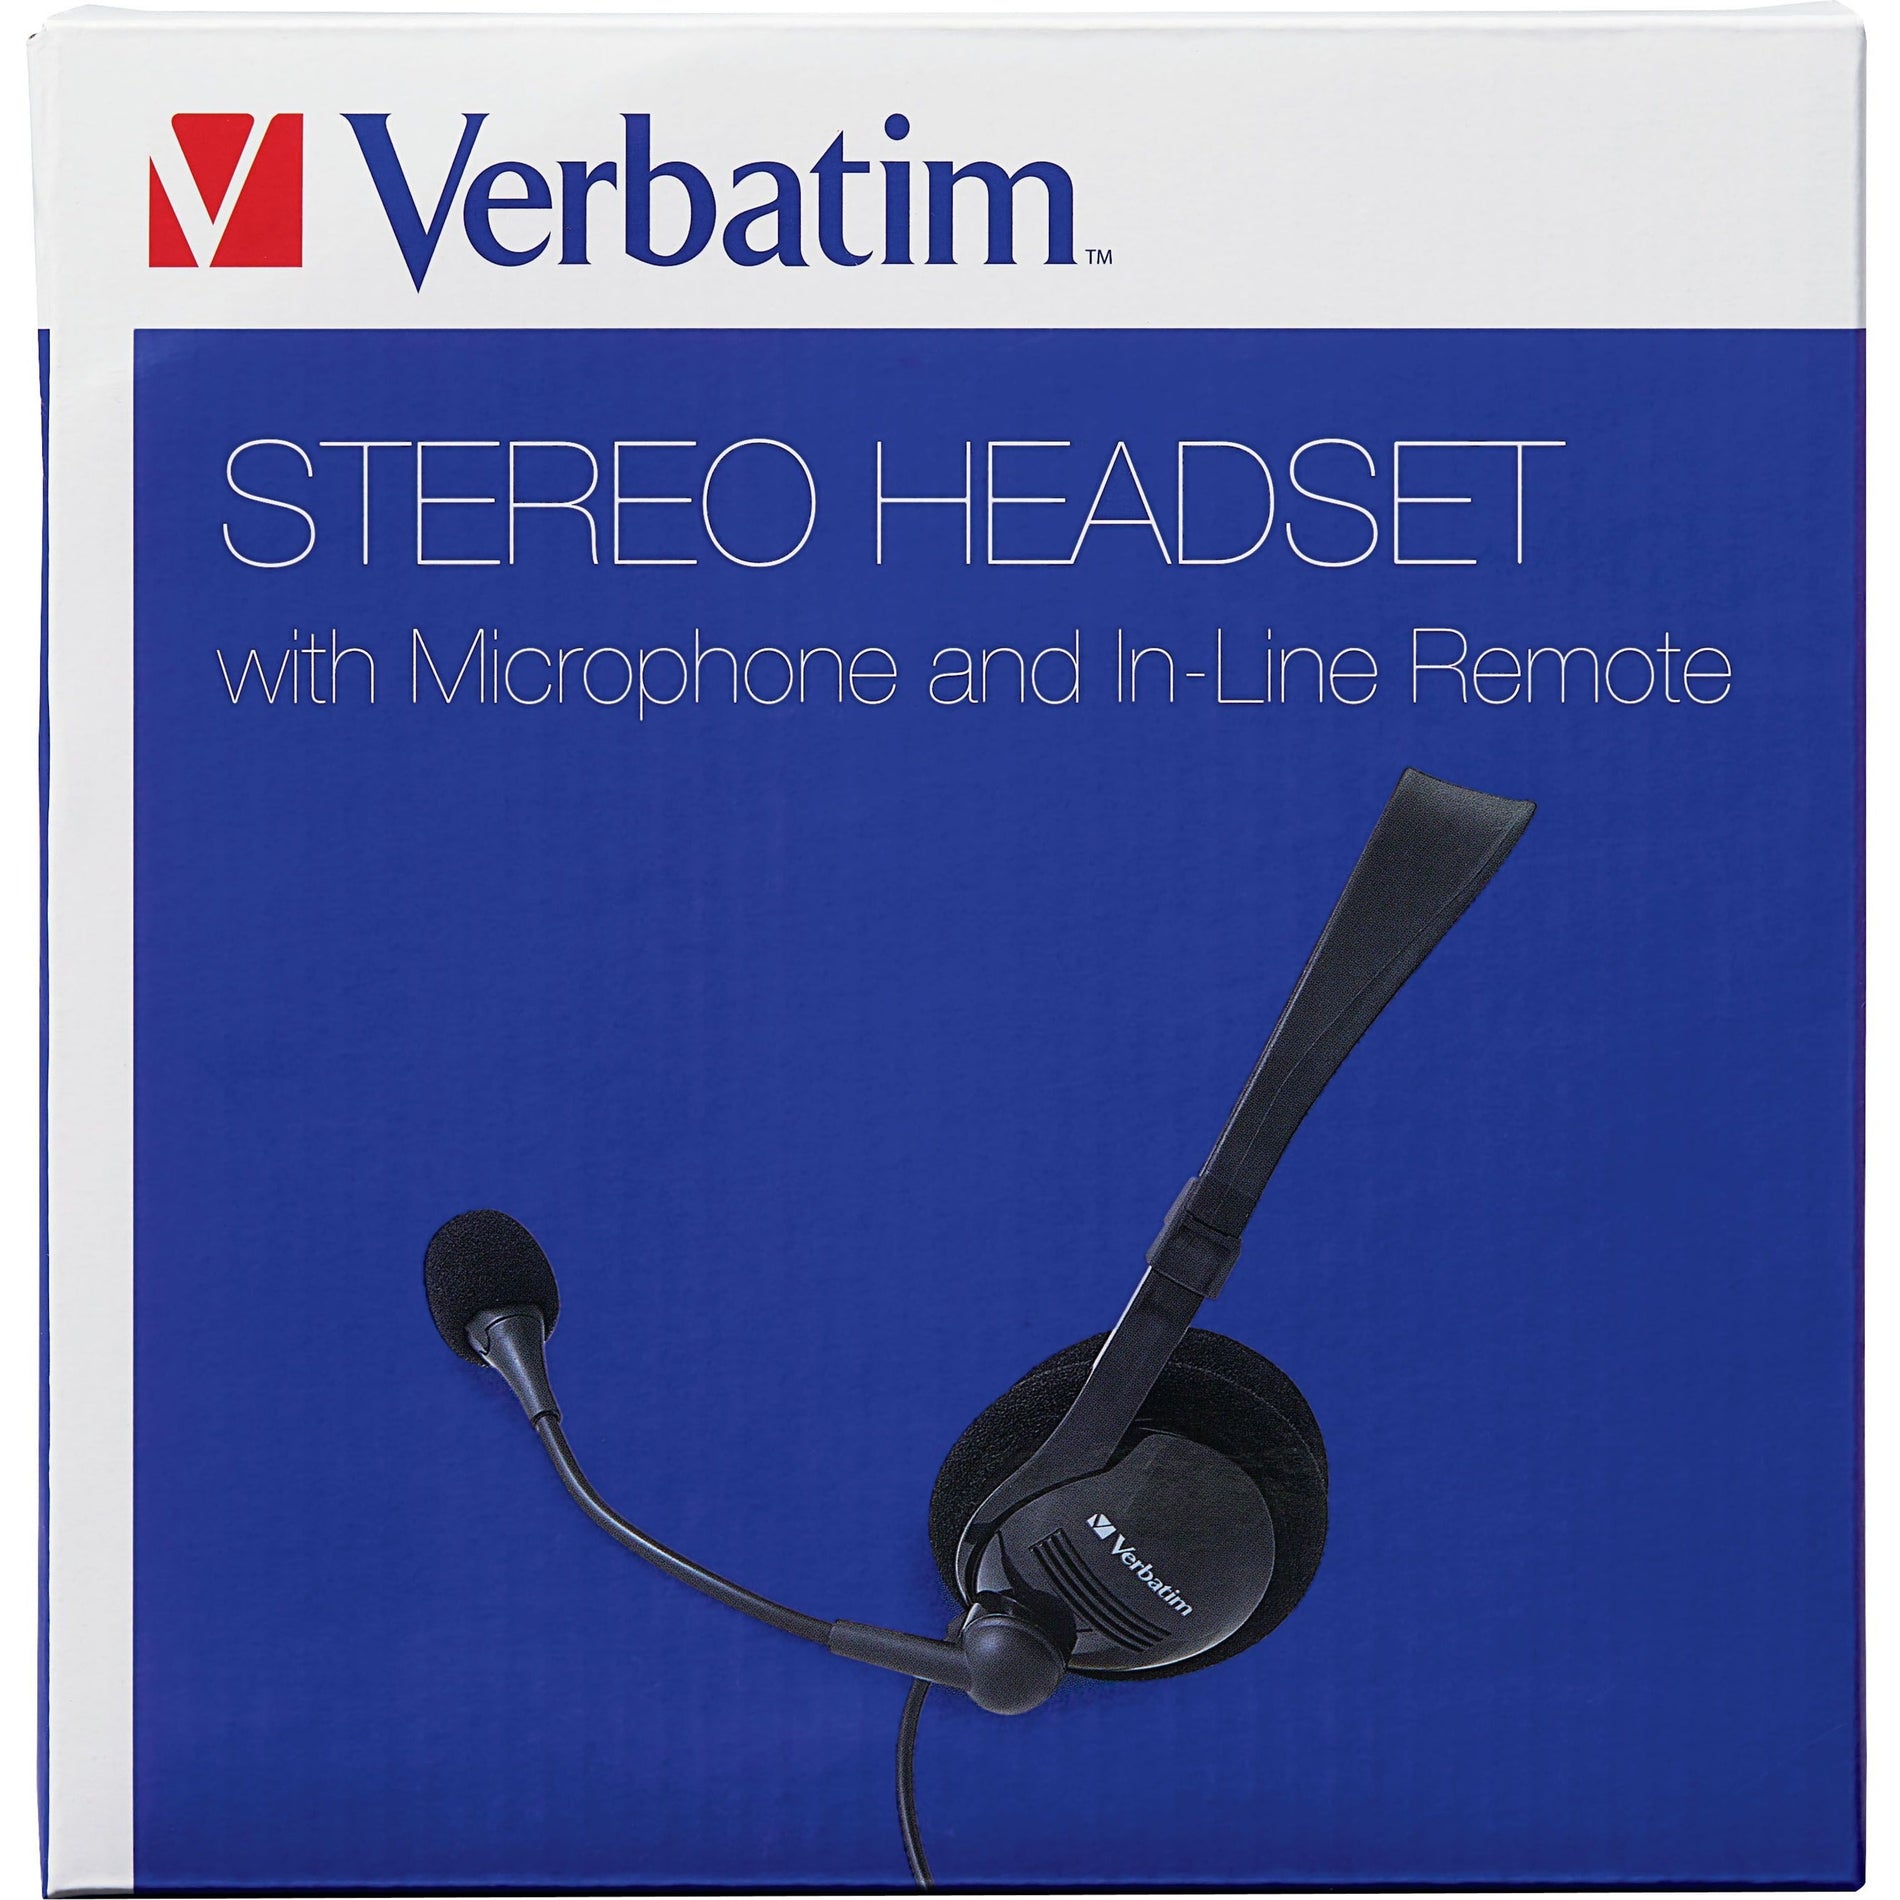 Verbatim 70723 Stereo Headset with Microphone and In-Line Remote, USB Type A, 1 Year Warranty